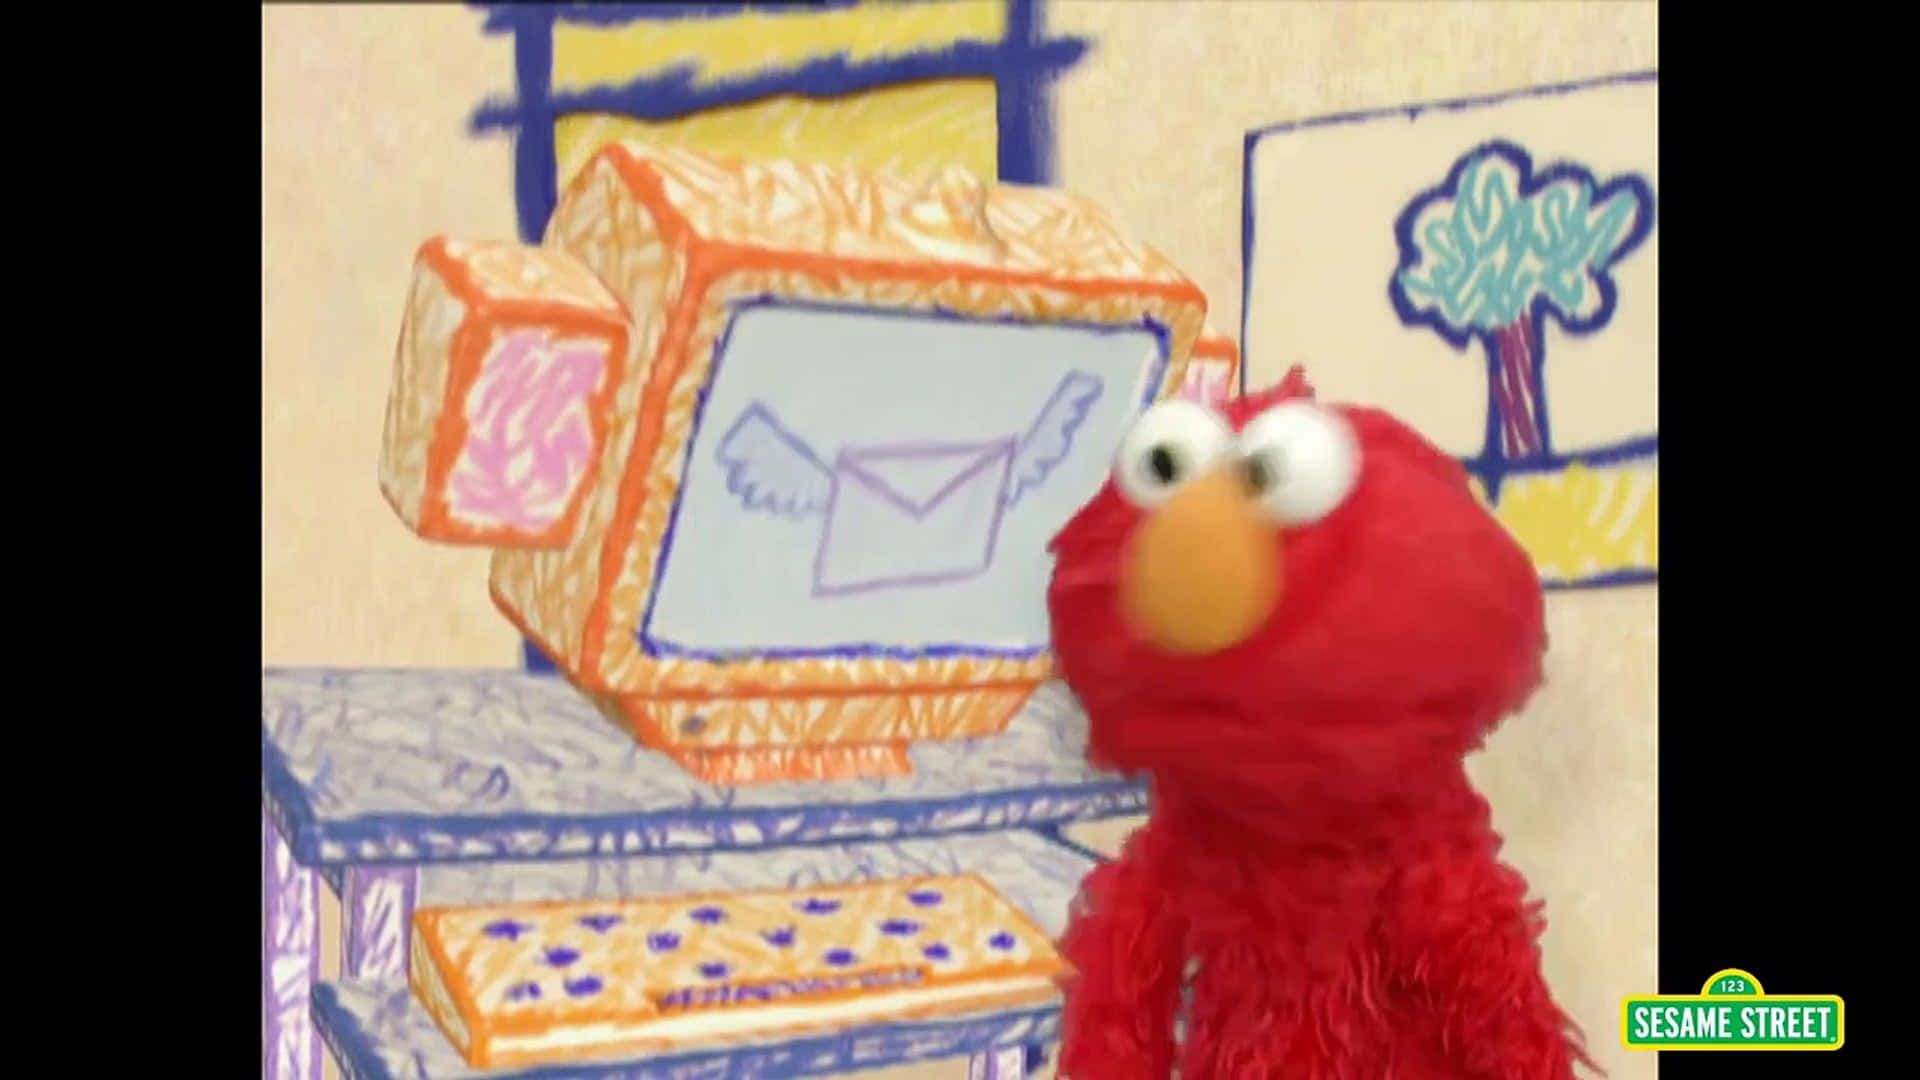 Let’s Play in Elmo's World